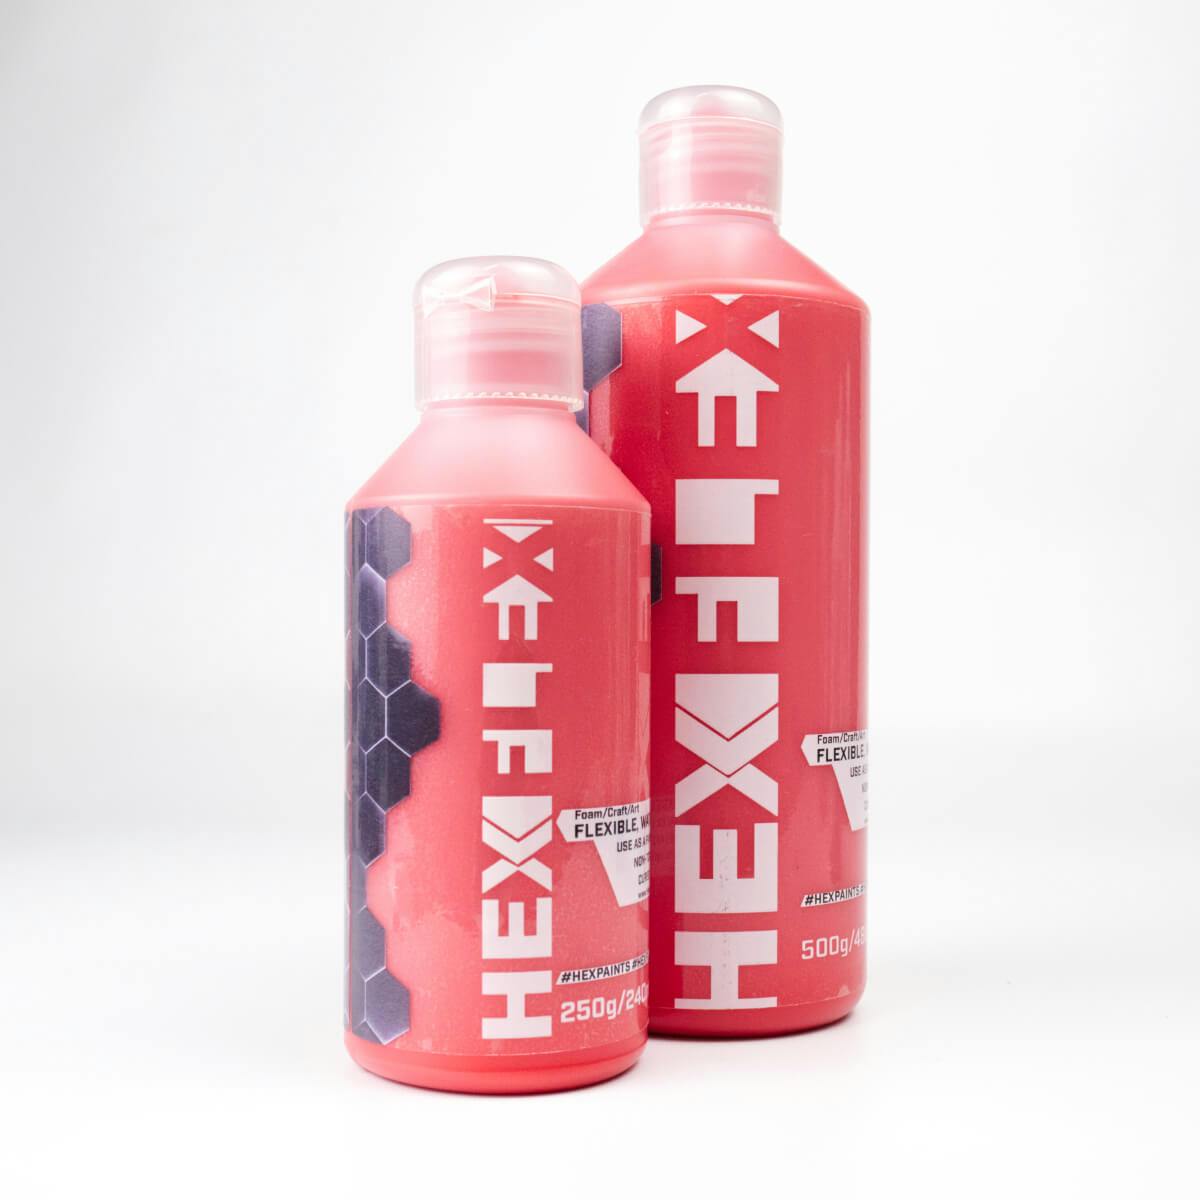 Product HexFlex Primer in red